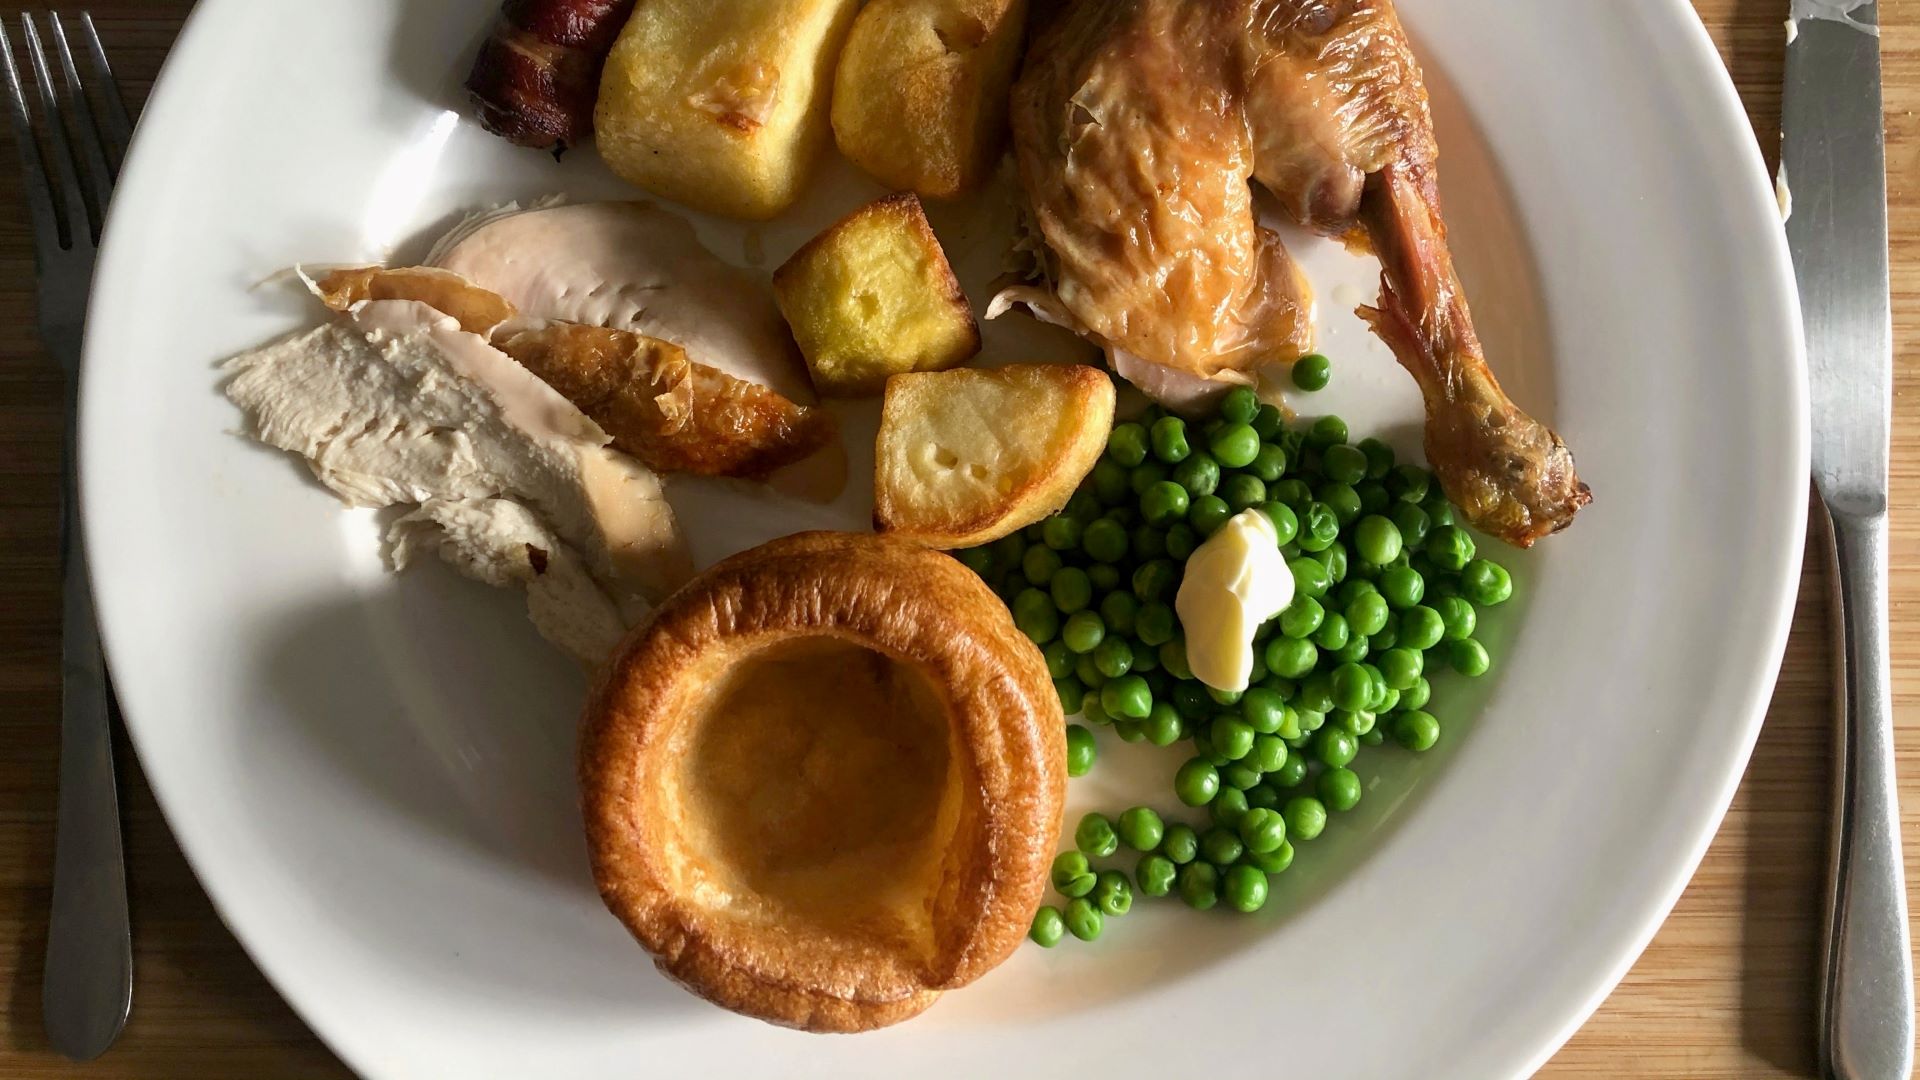 A Christmas dinner including Yorkshire pudding